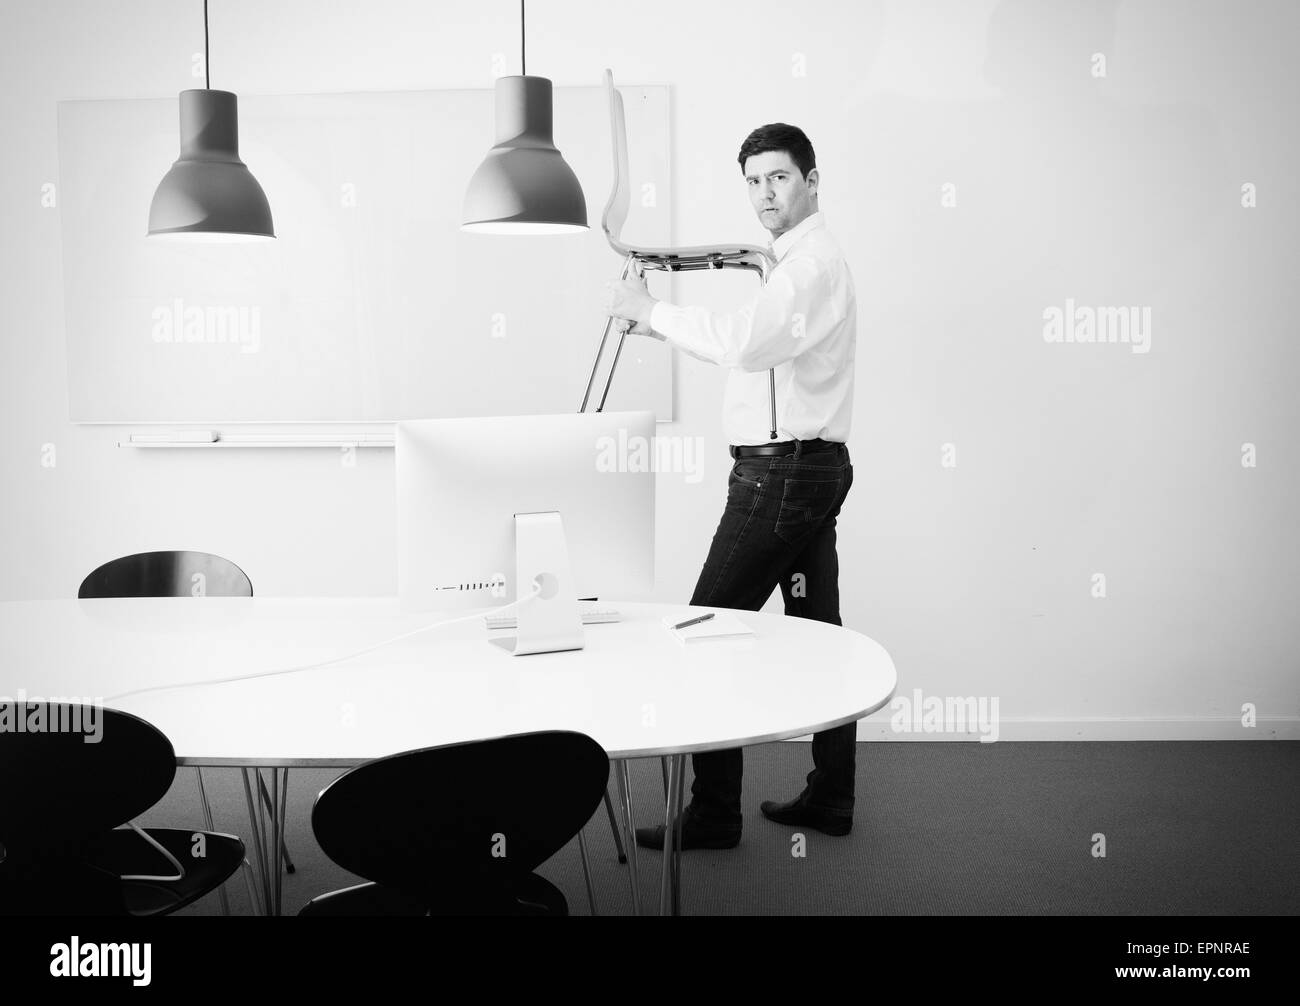 Businessman carrying chair in office. Conceptual image of business relocation, startup or change. Stock Photo